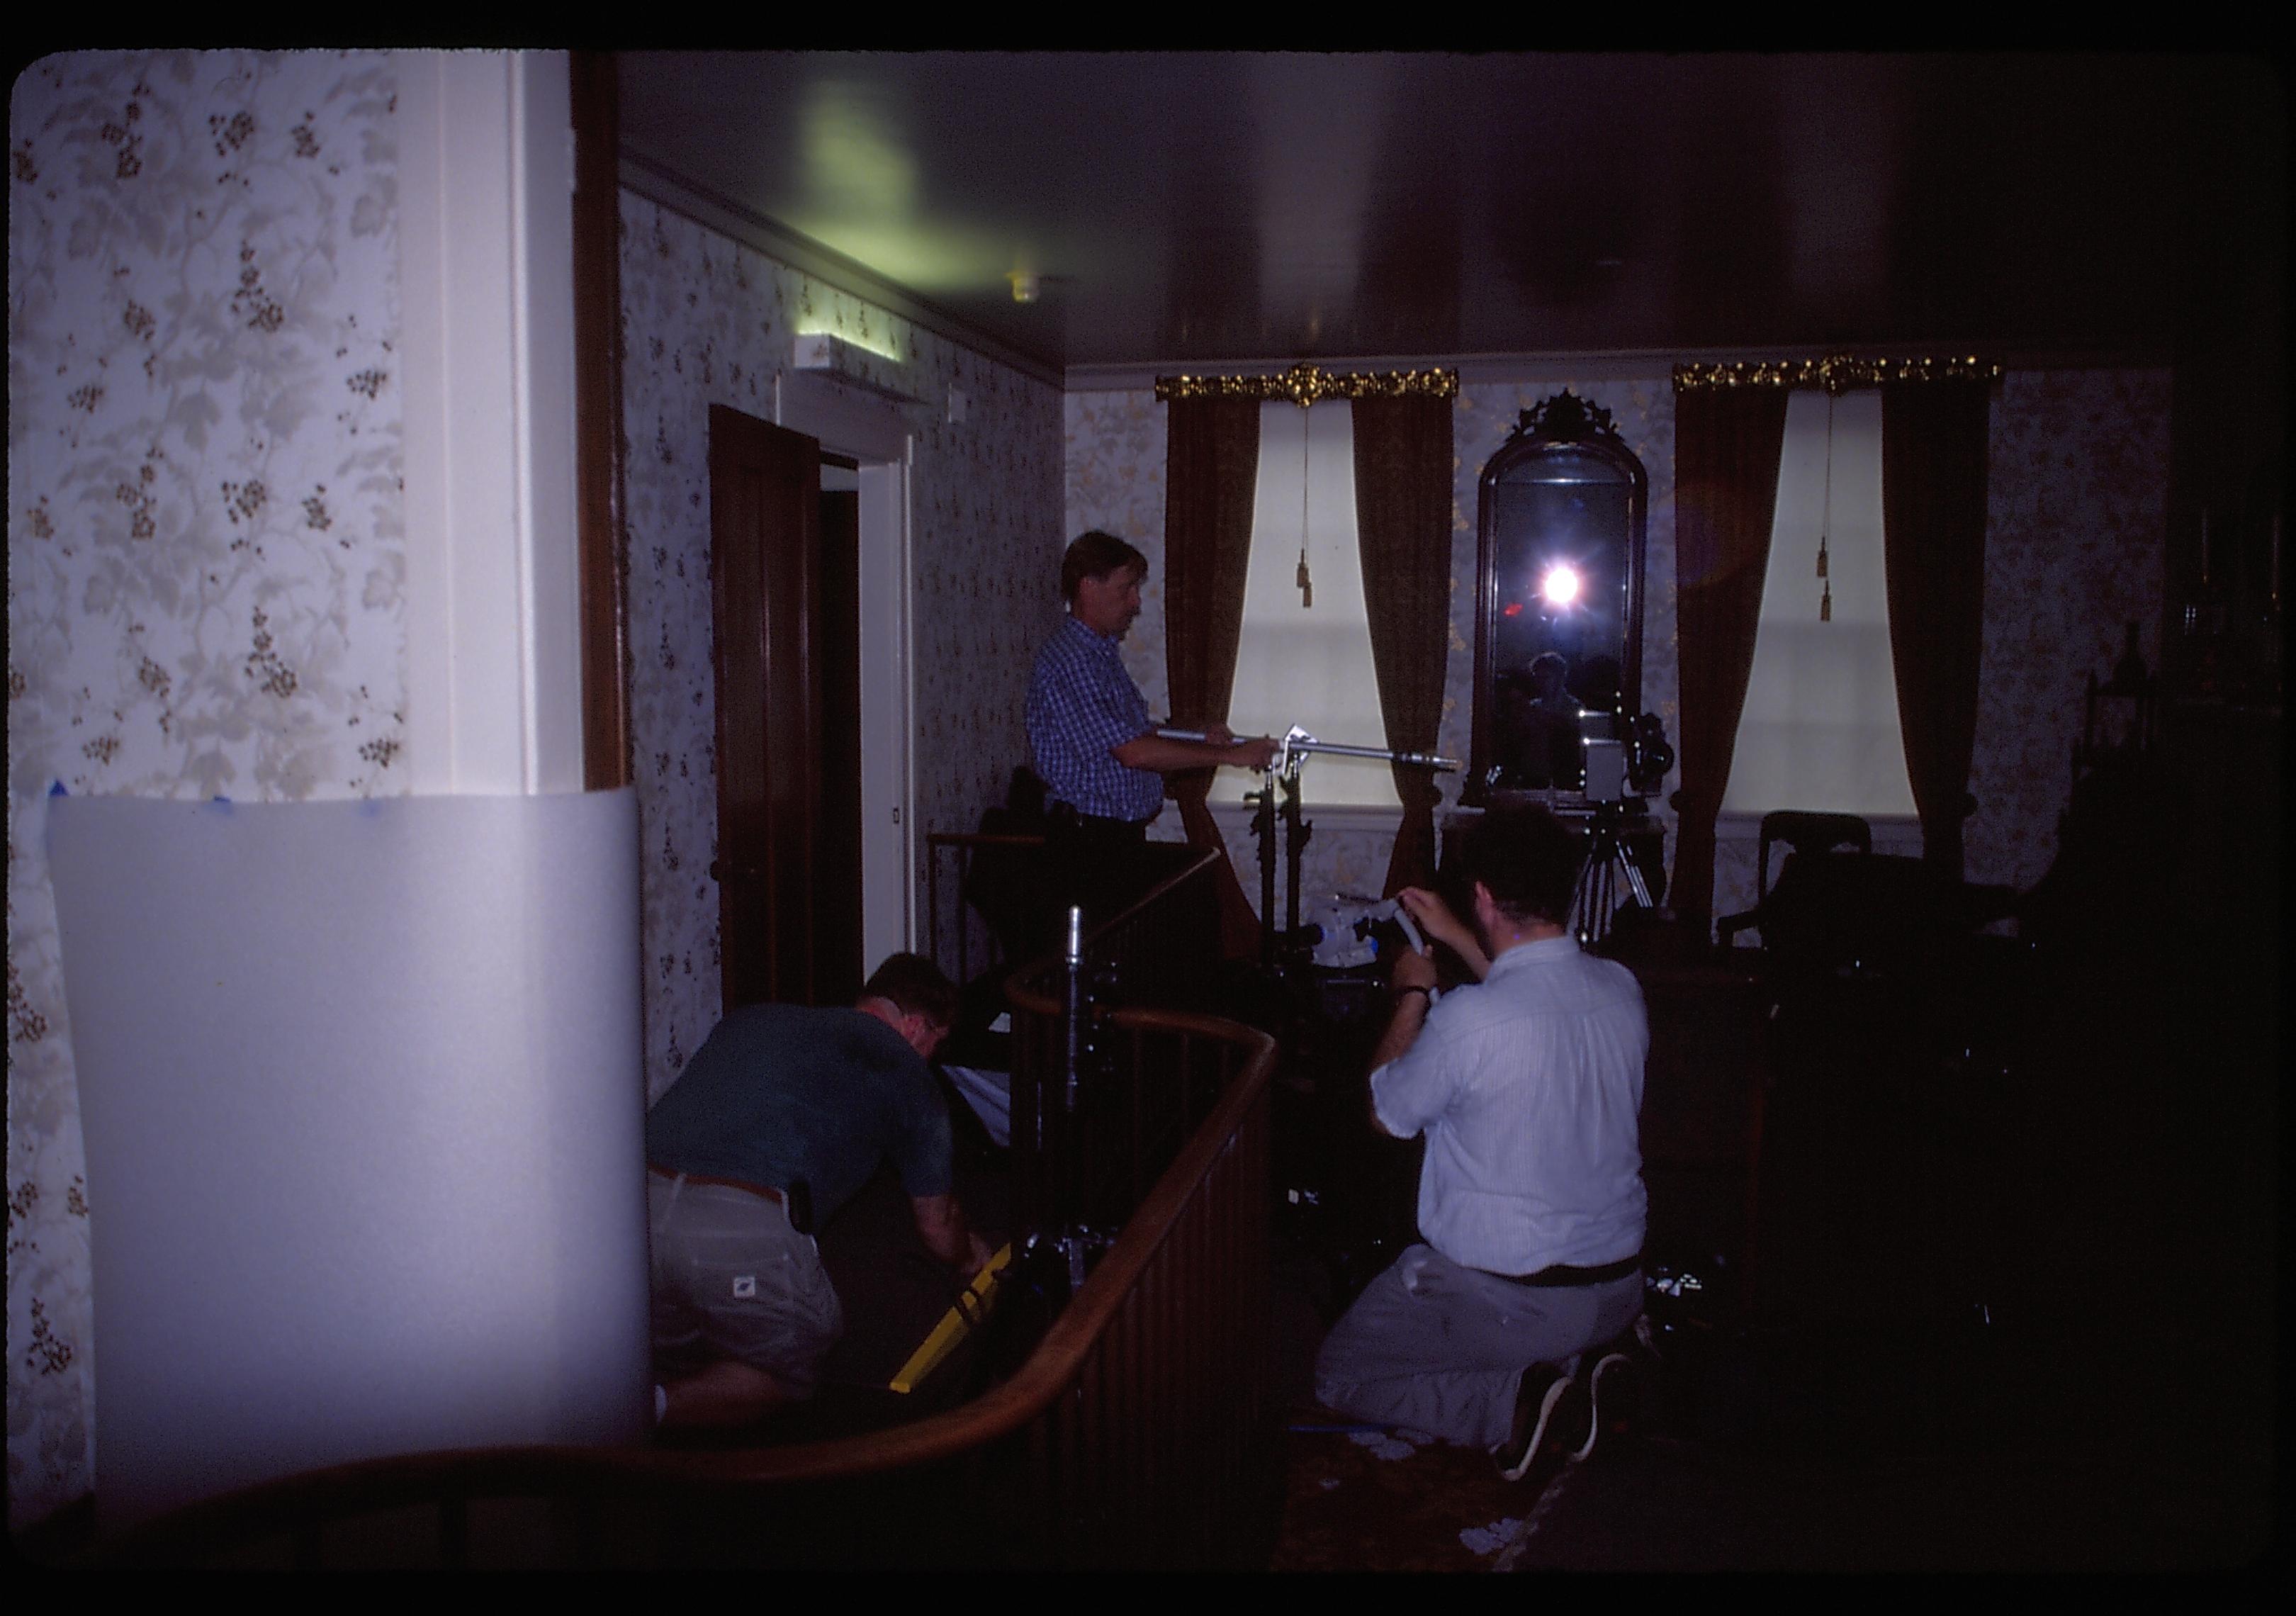 Set up for C-SPAN television show-front parlor. Lincoln Home NHS- C-SPAN, exp 35 C-SPAN, parlor, equipment